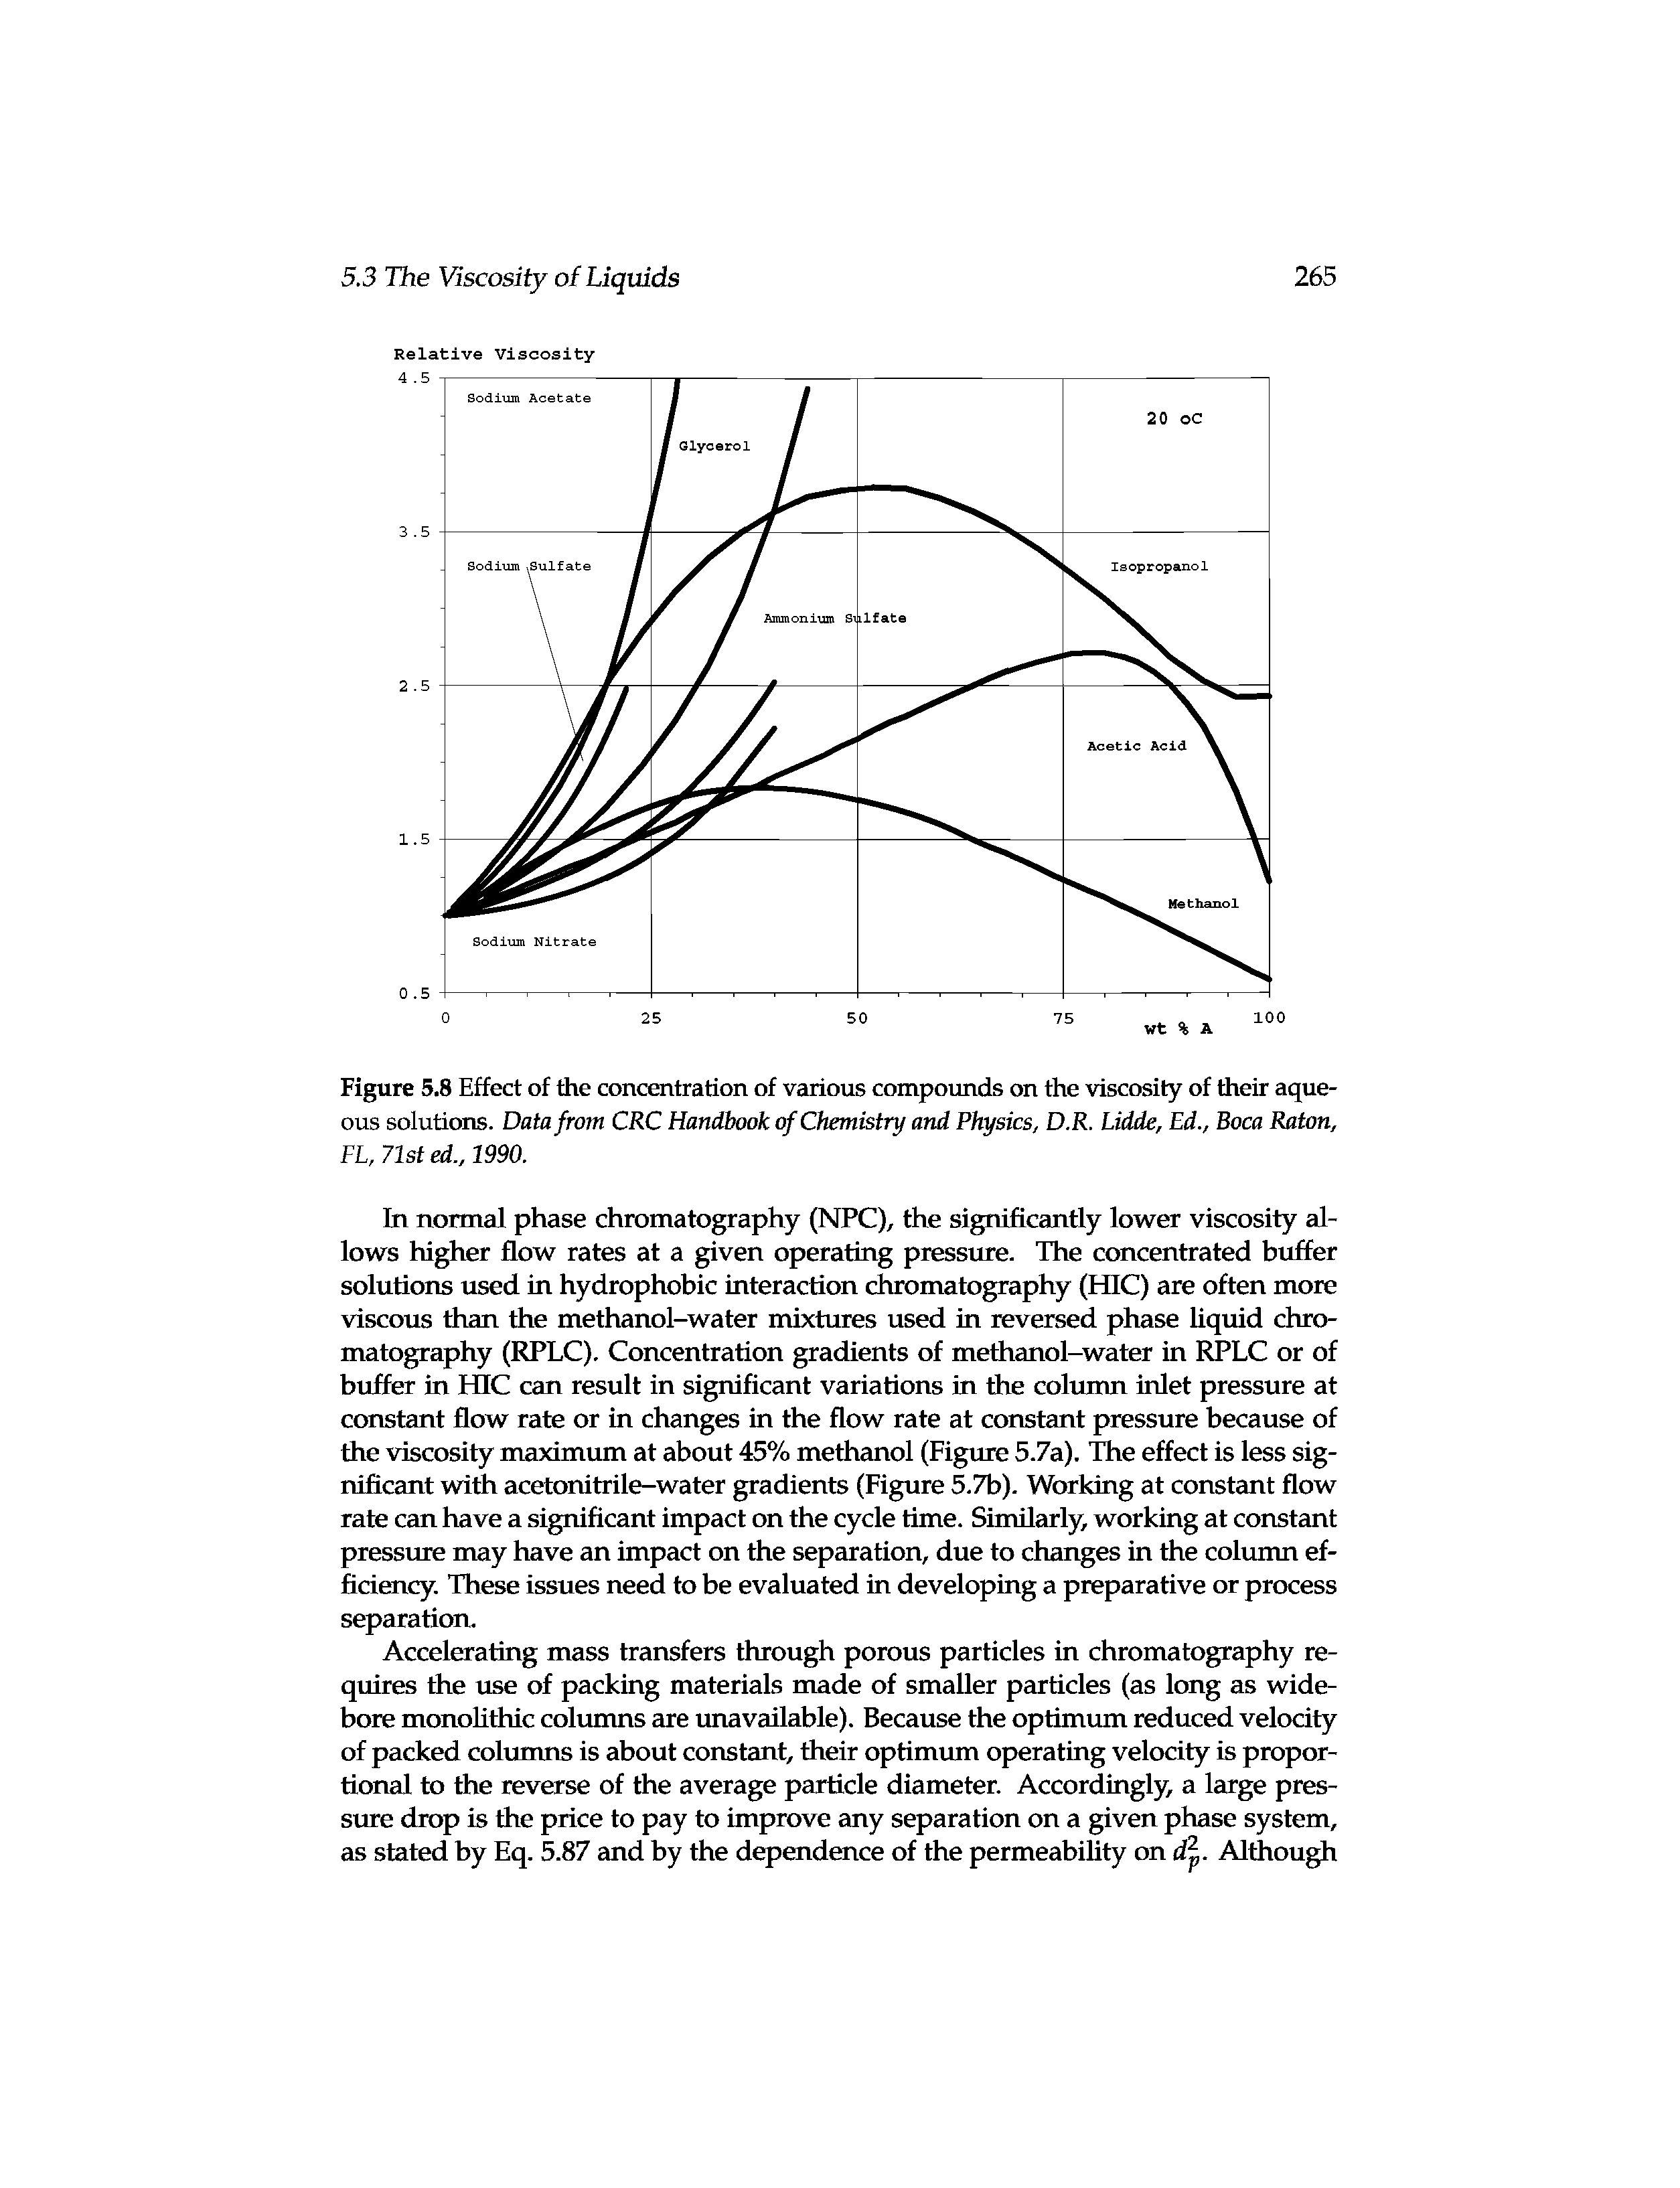 Figure 5.8 Effect of the concentration of various compounds on the viscosity of their aqueous solutions. Data from CRC Handbook (rf Chemistry and Physics, D.R. Lidde, Ed., Boca Raton, FL, listed., 1990.